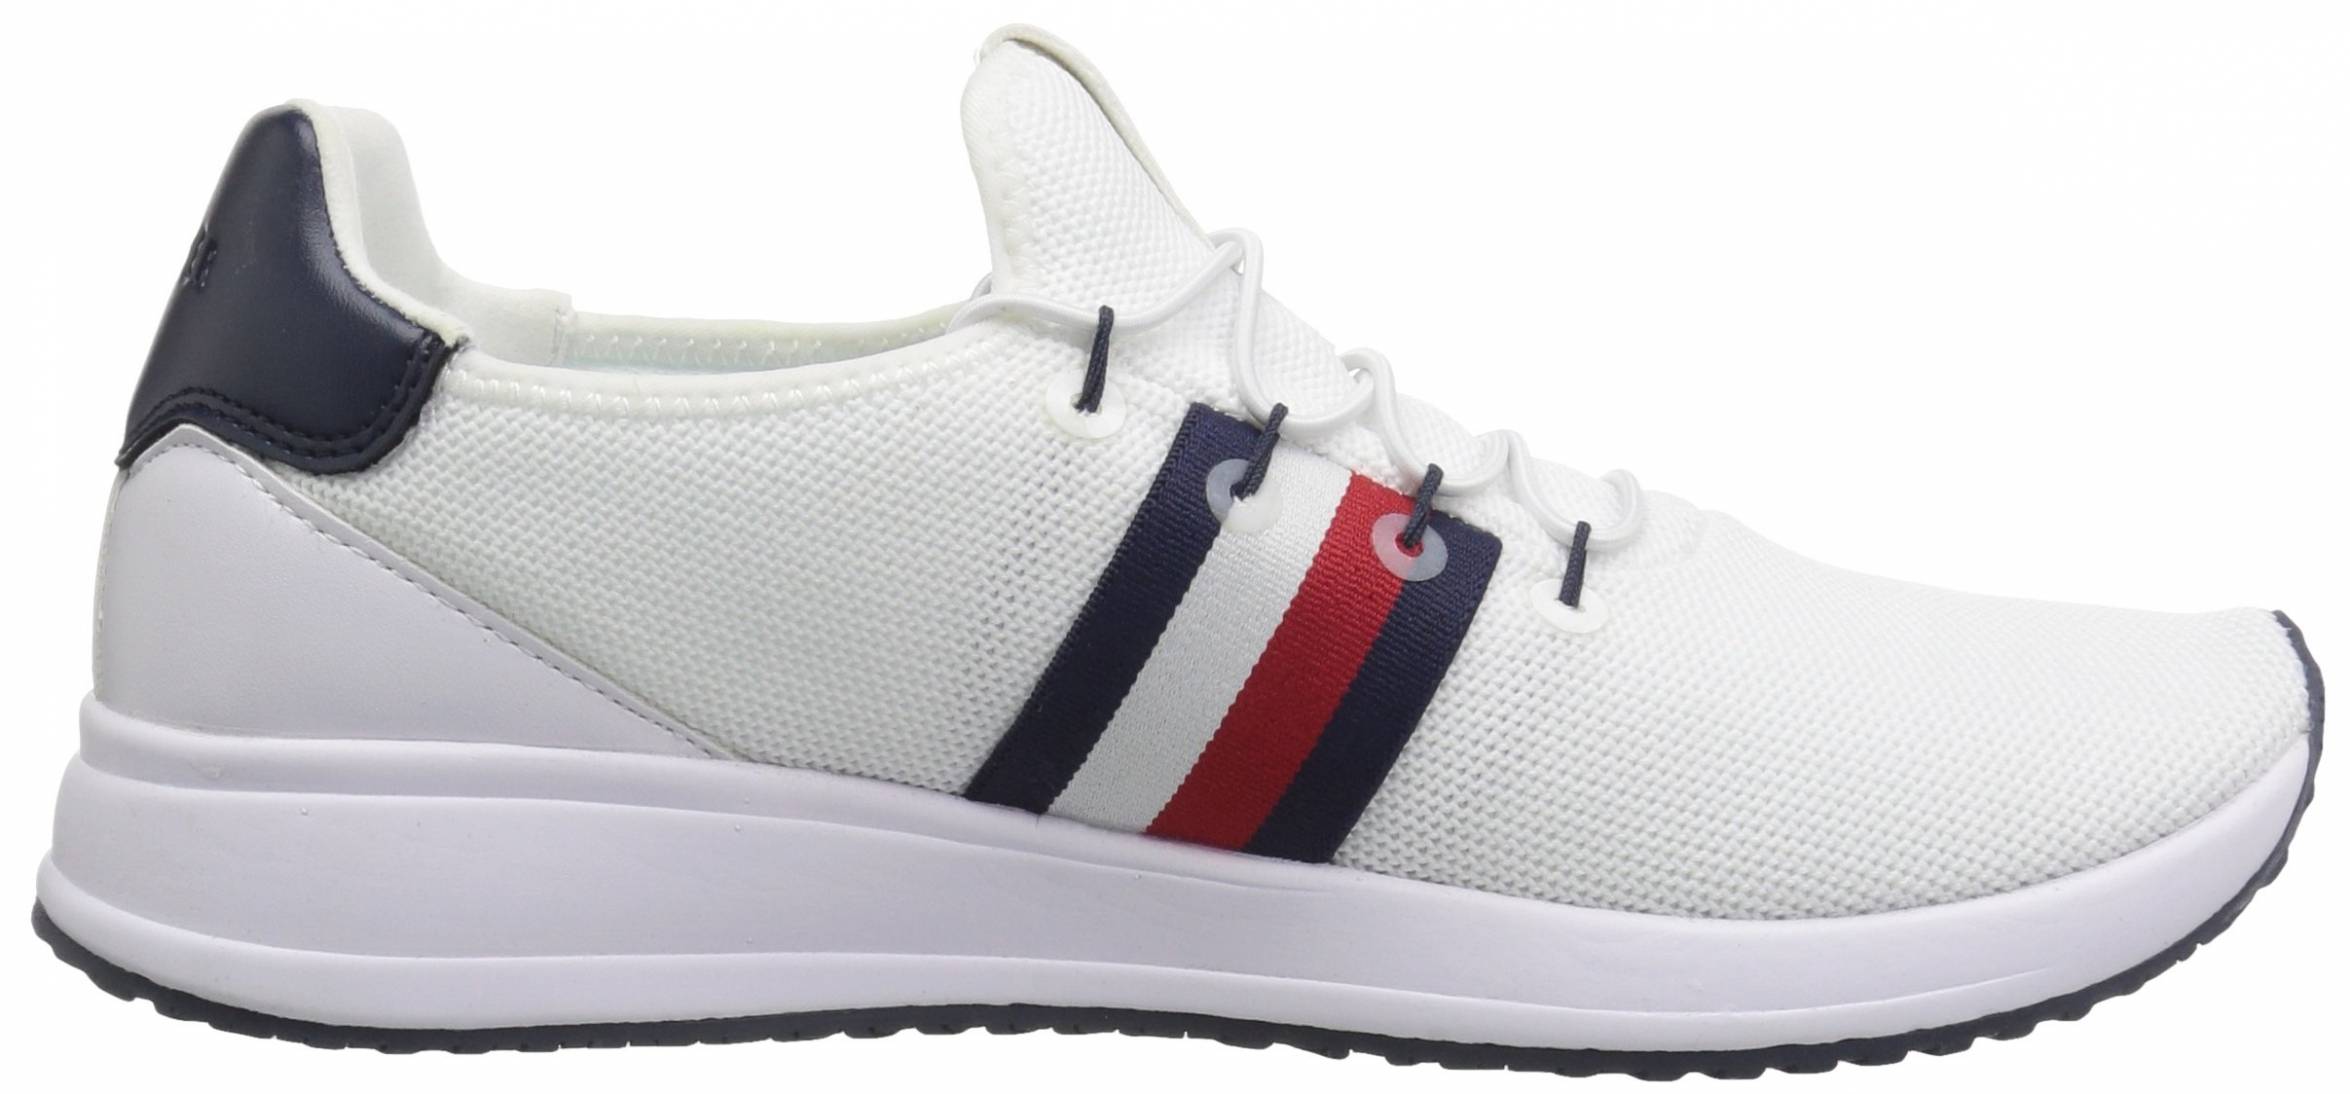 red tommy hilfiger shoes